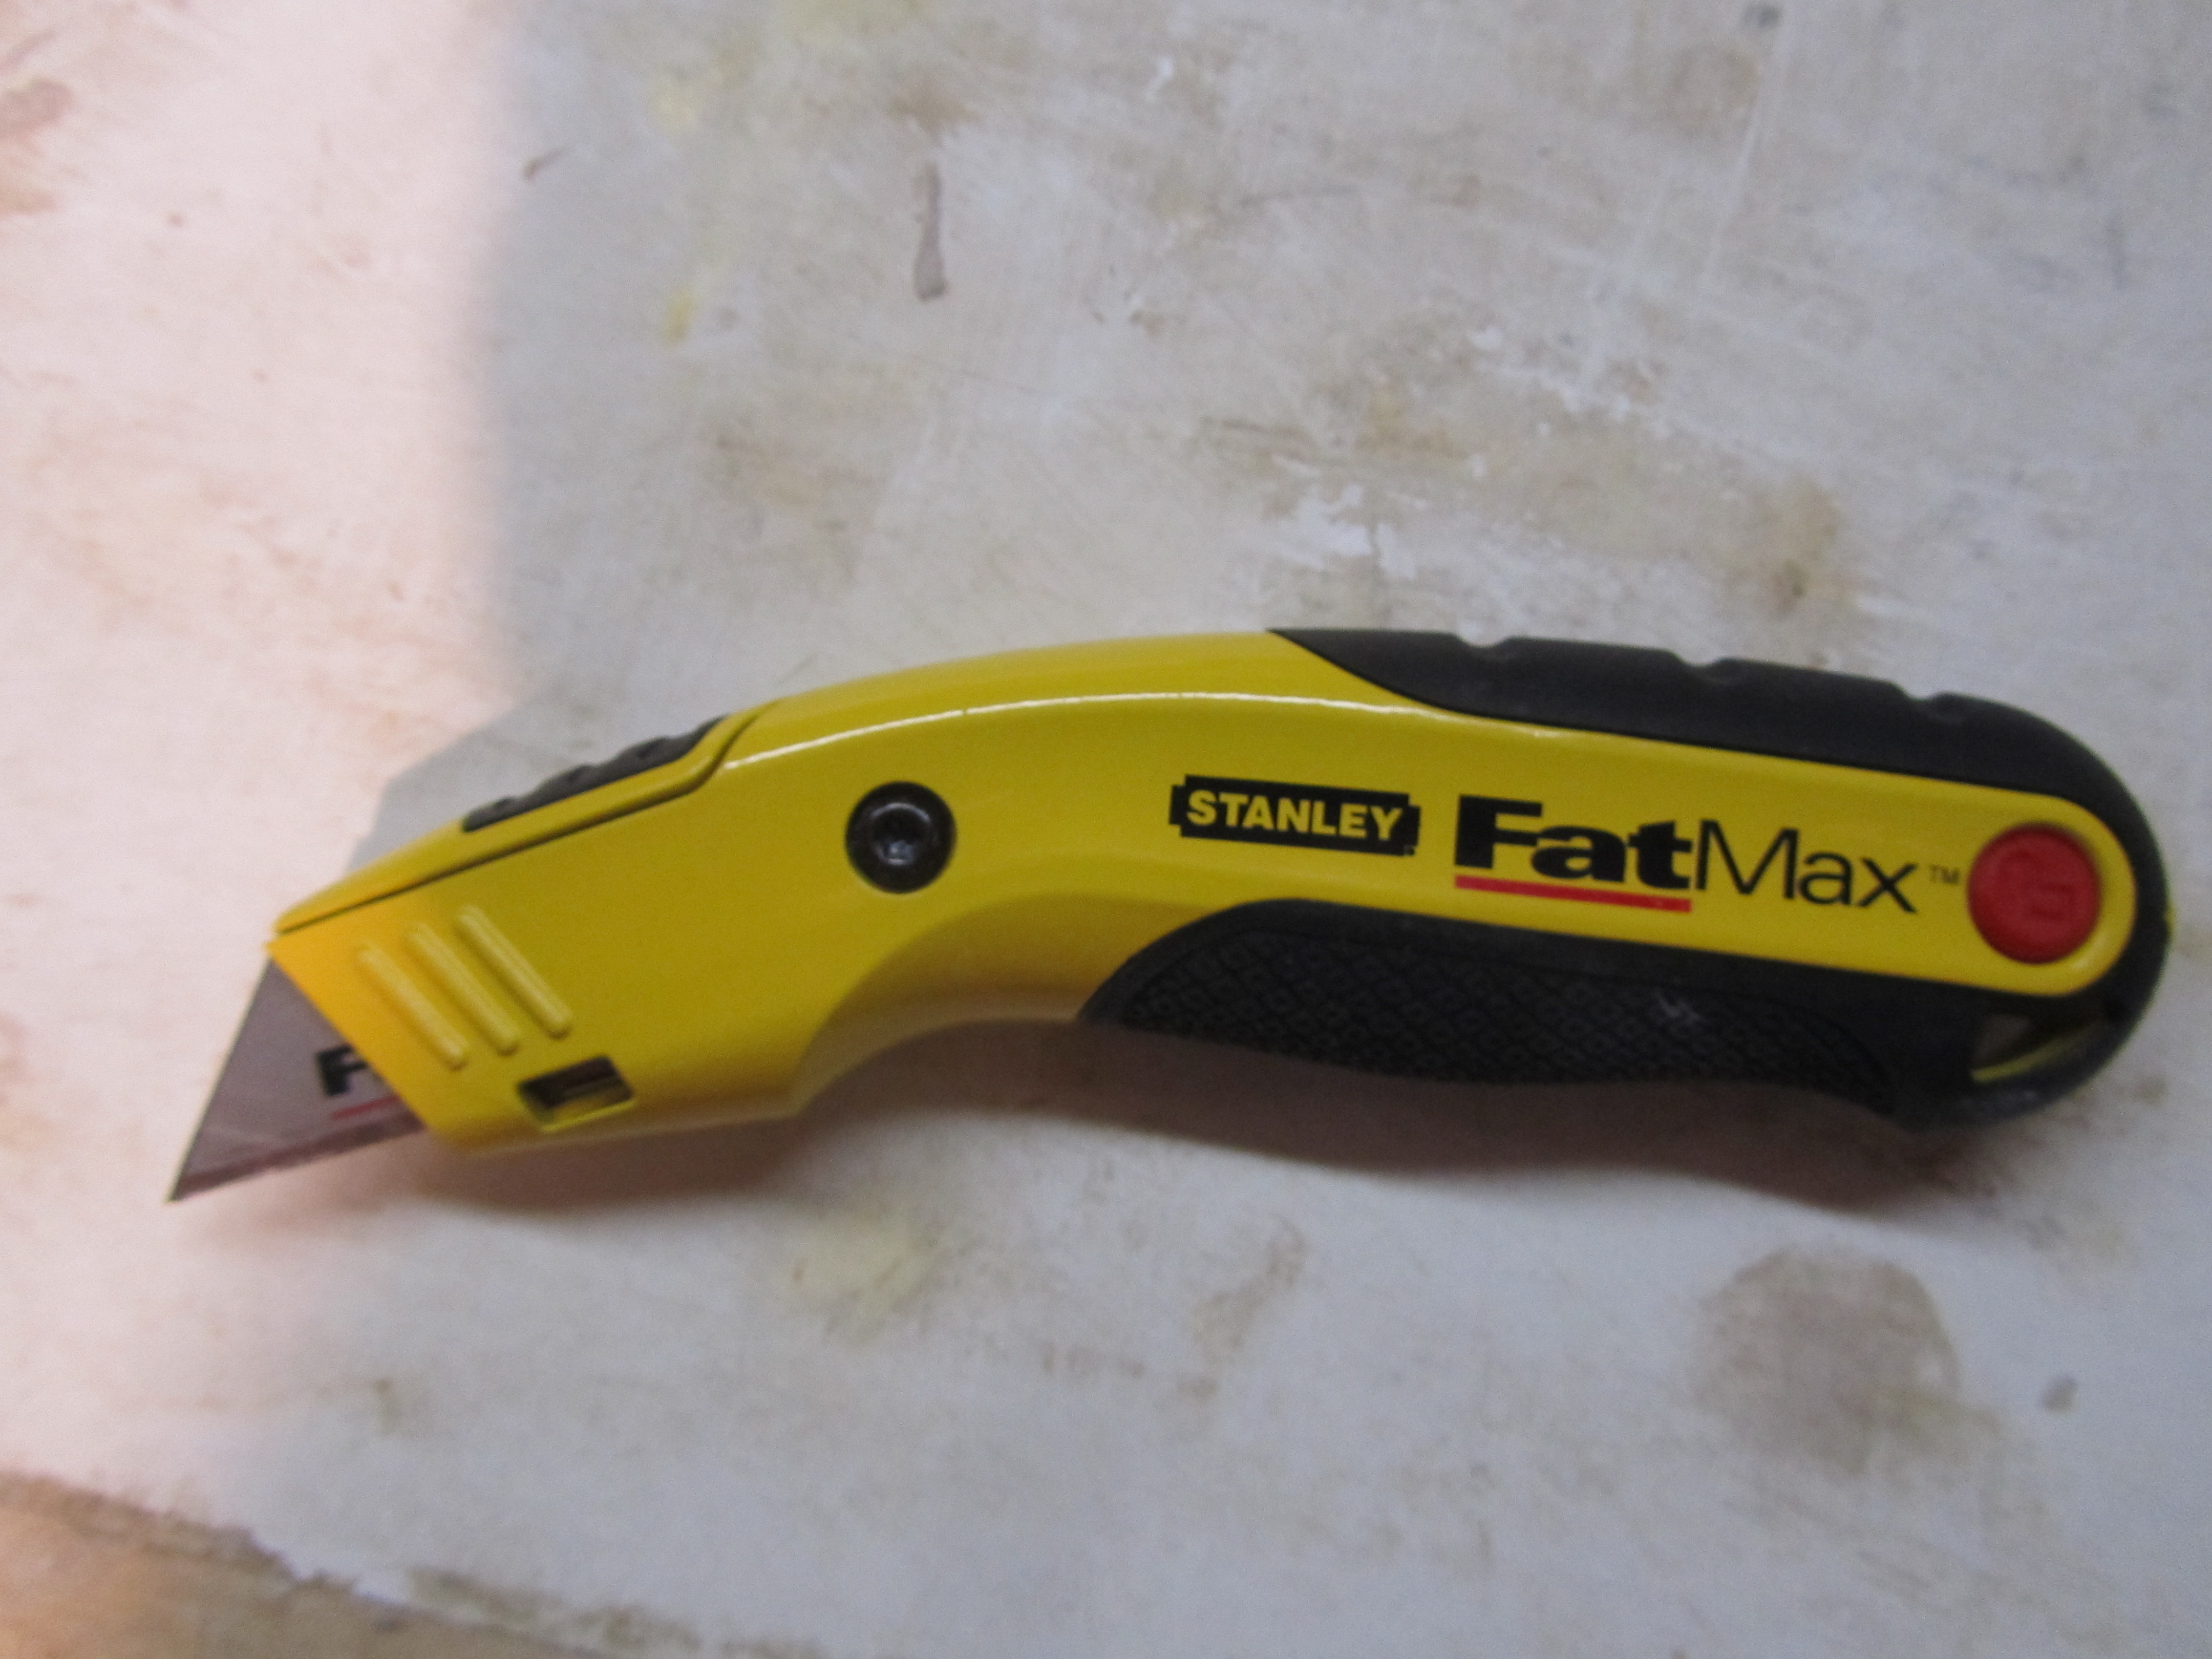 Why Do Carpenters Use Utility Knives? 